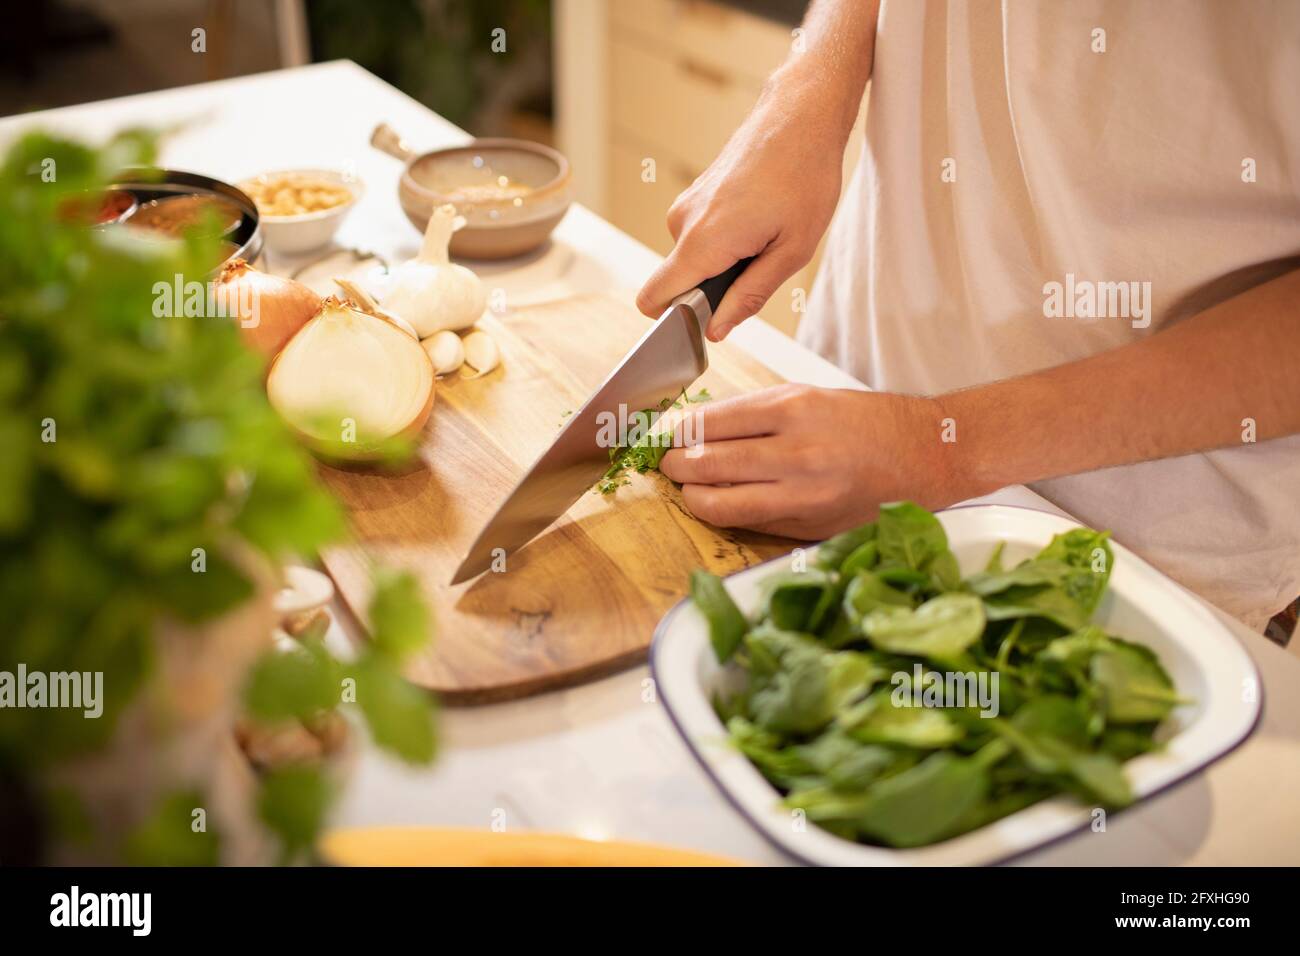 Man cooking in kitchen cutting vegetables Stock Photo